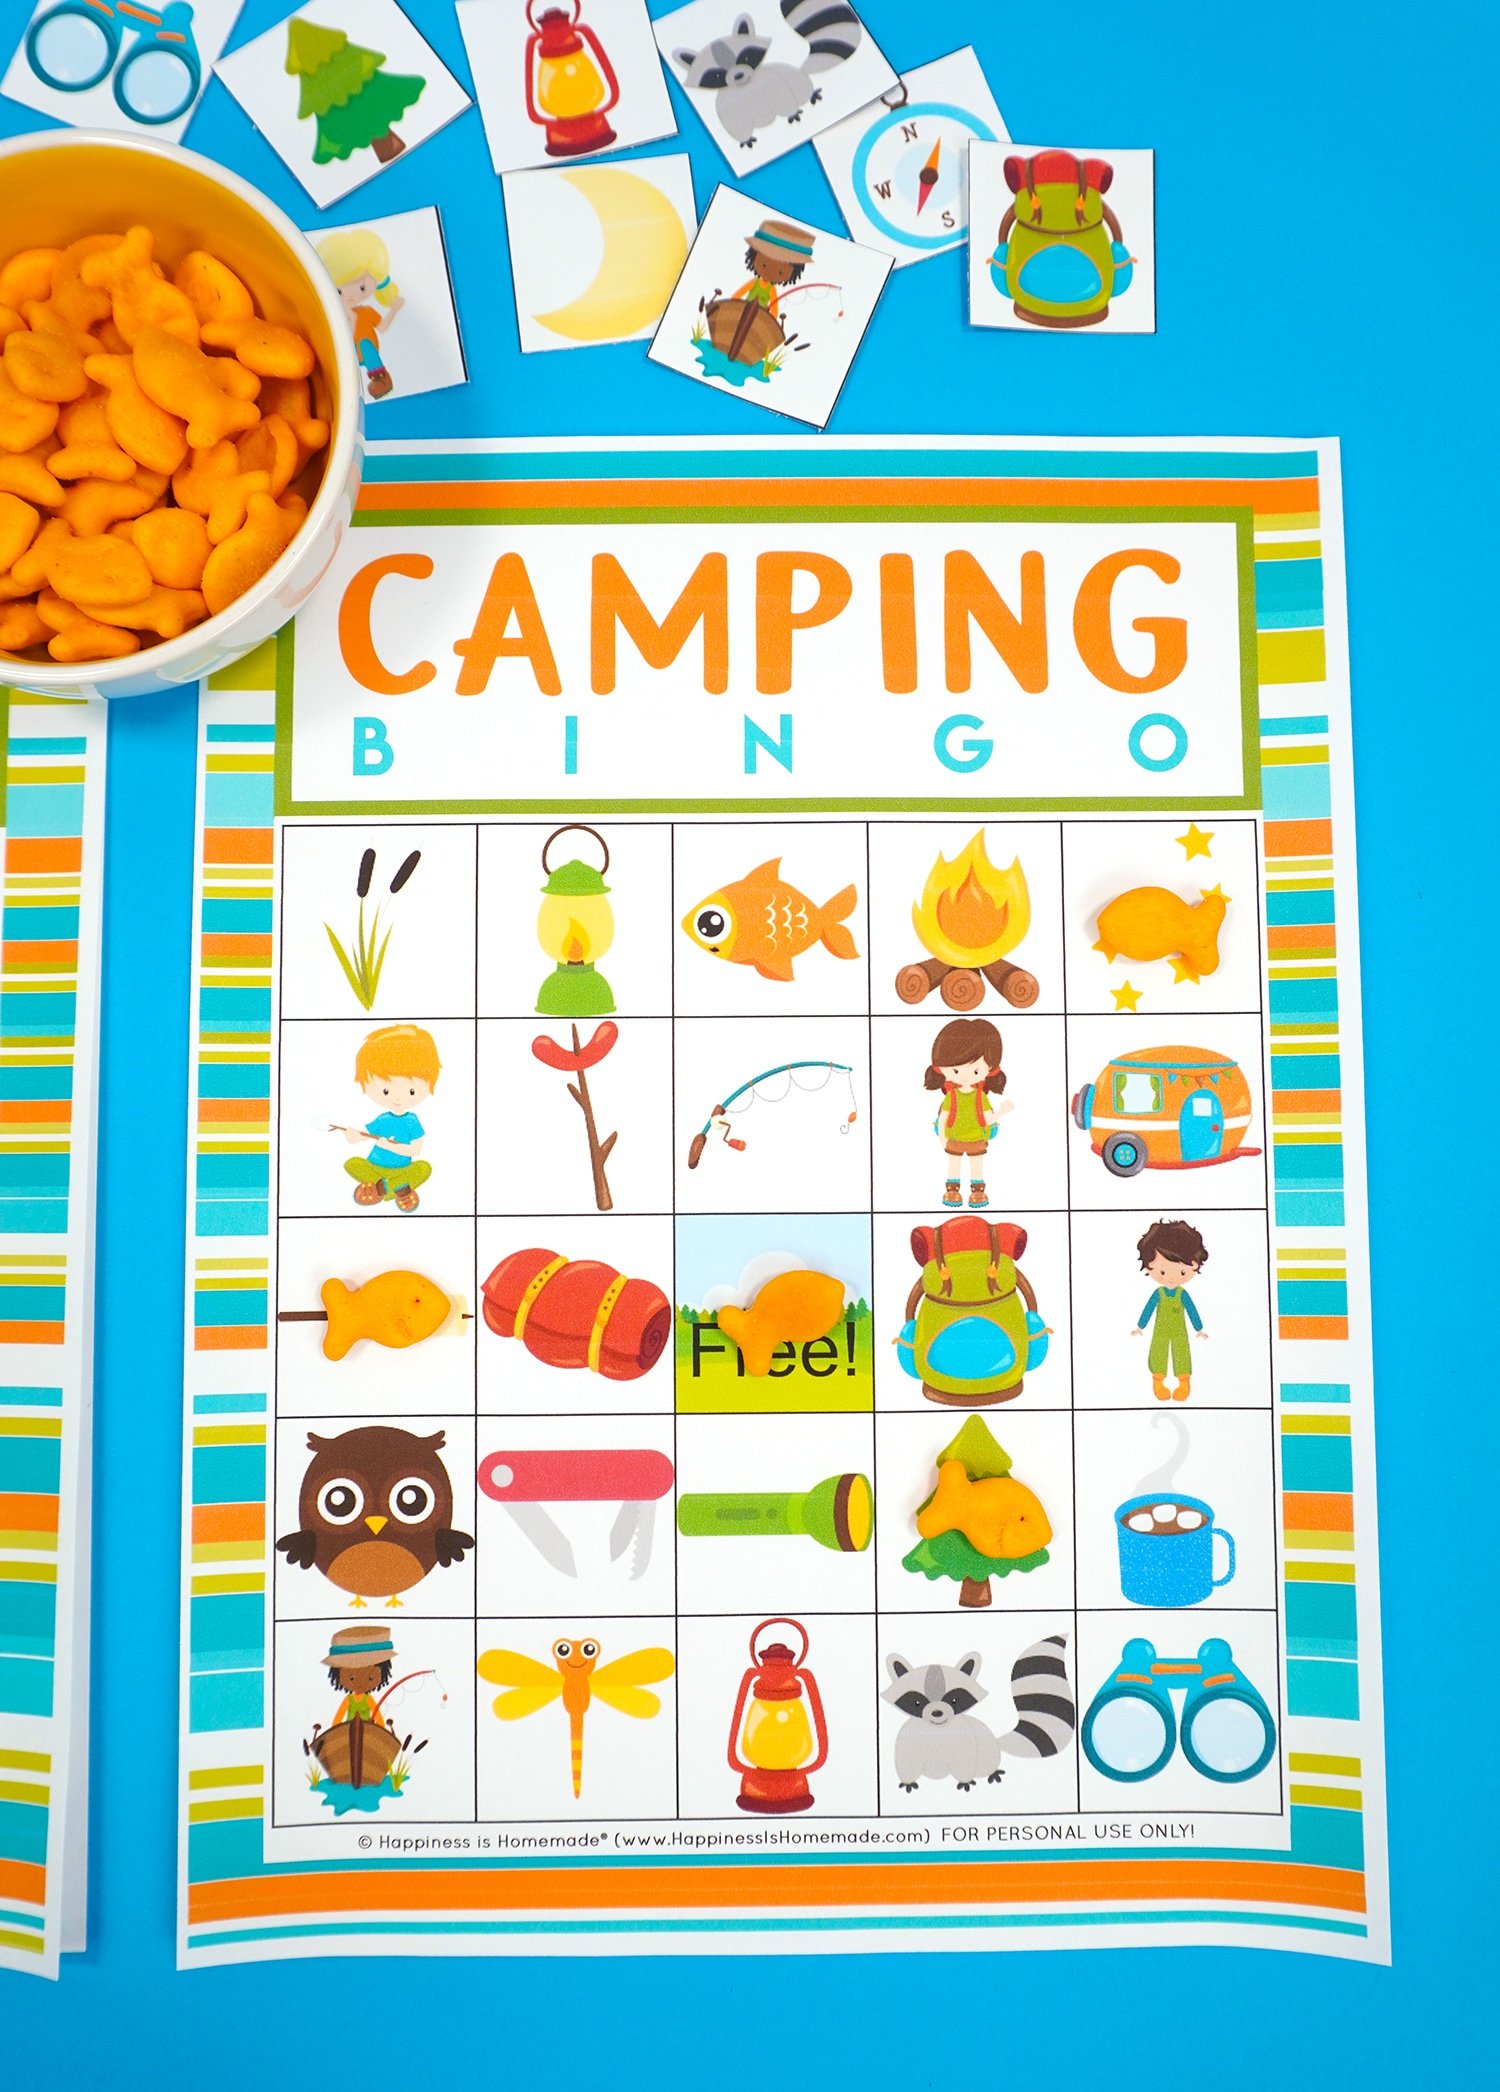 Camping Bingo Printable game card on a blue background with scattered calling cards and bowl of Goldfish crackers for game markers